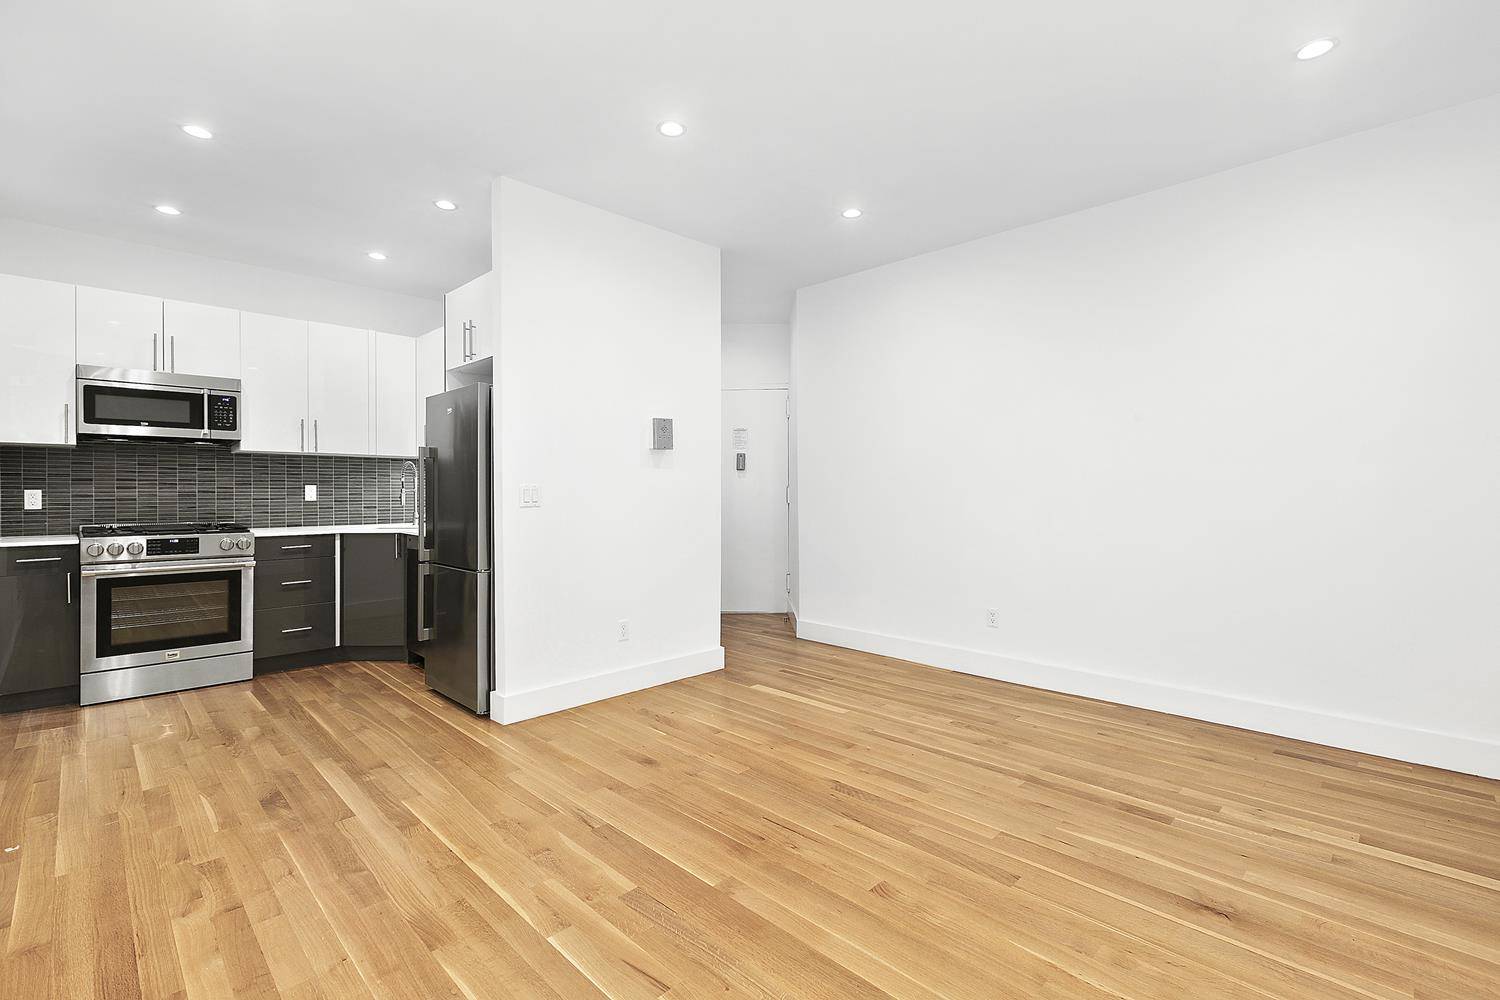 BETWEEN 2 PARKS... This gut renovated 4 bedroom, 2 bath apartment is located between Central Park and Morningside Parks.